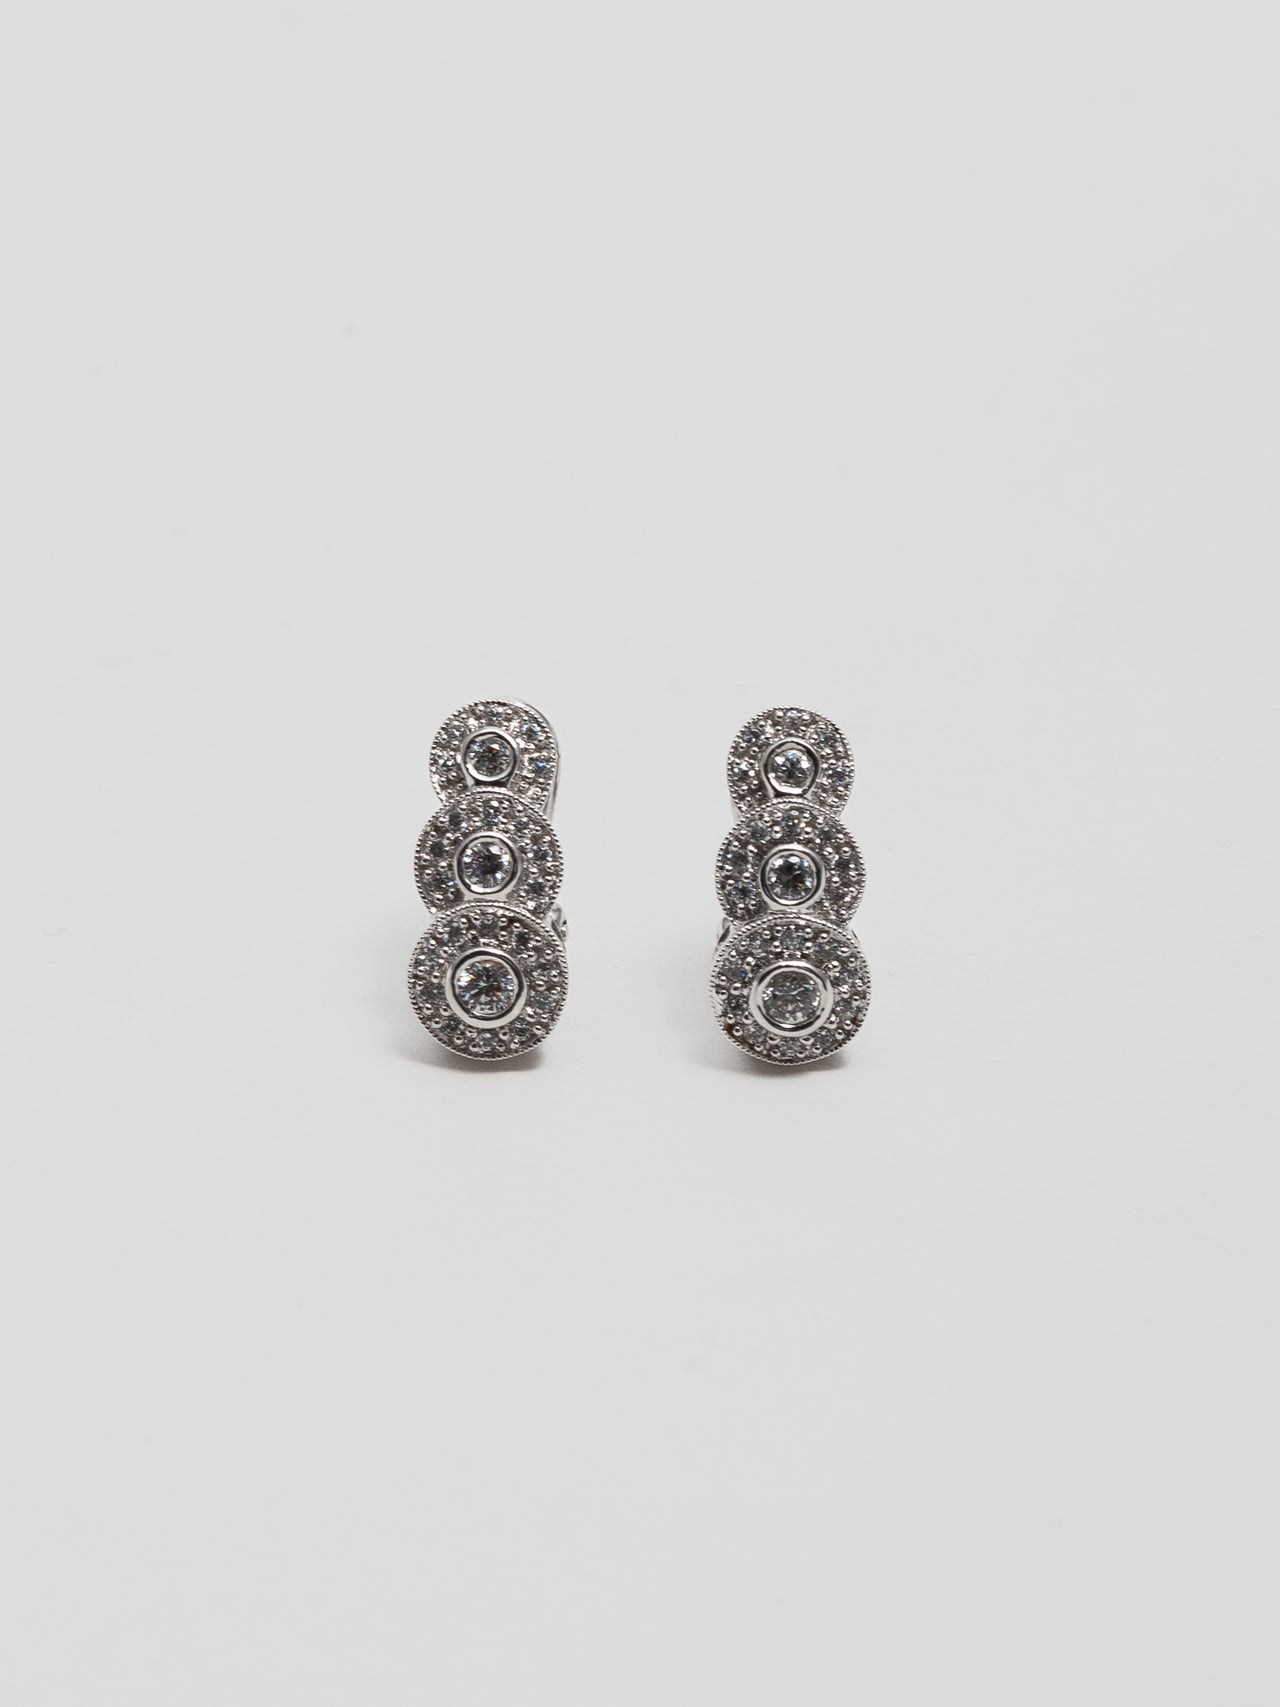 10Kt White Gold and Diamond Huggie Studs pictured on light grey background.